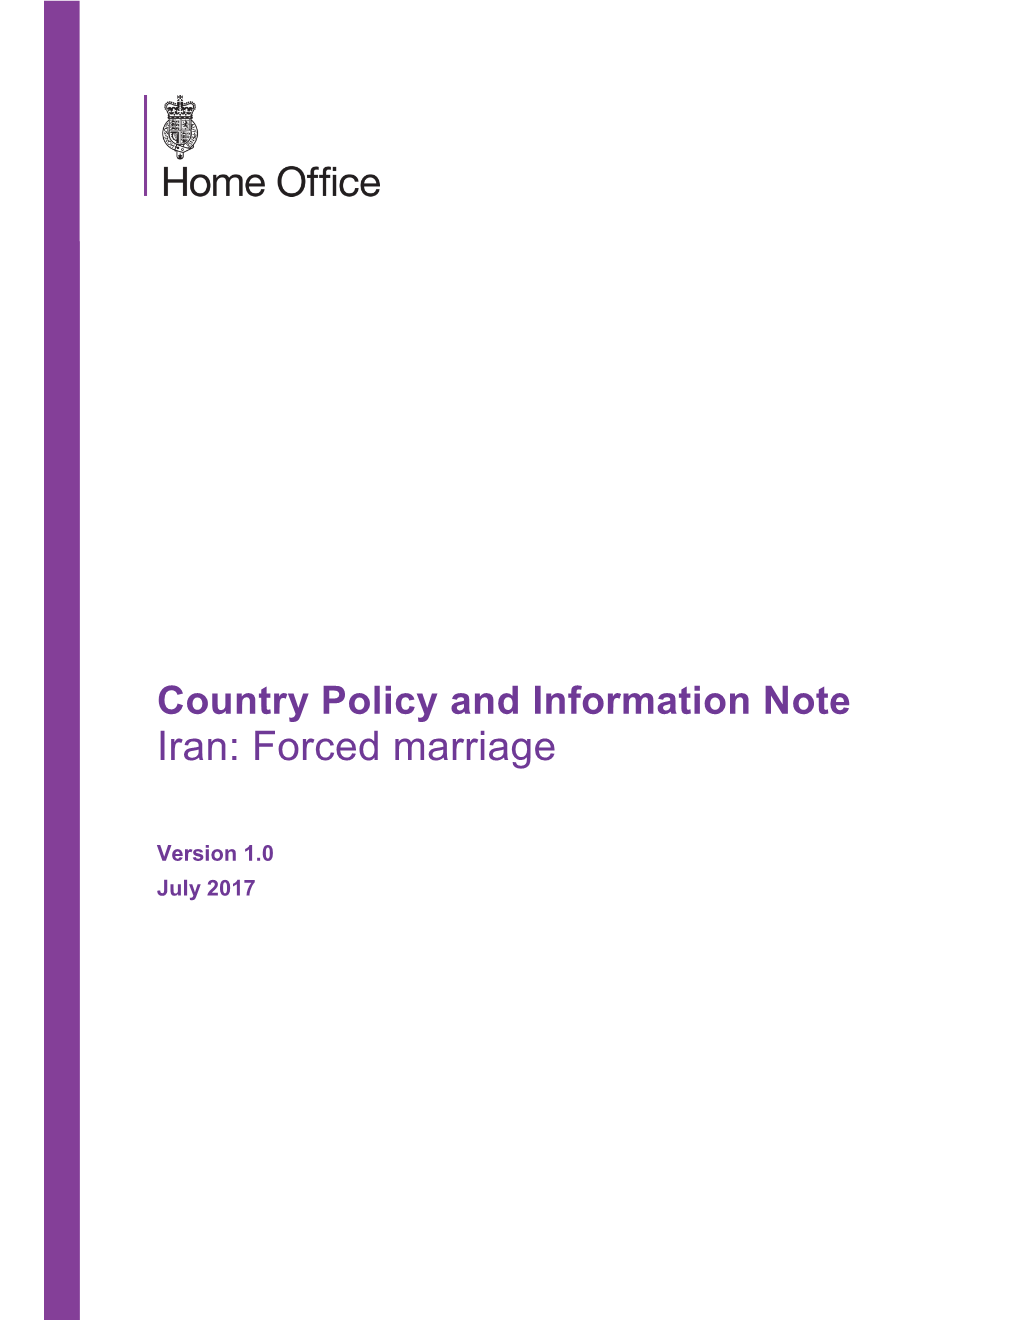 Iran: Forced Marriage